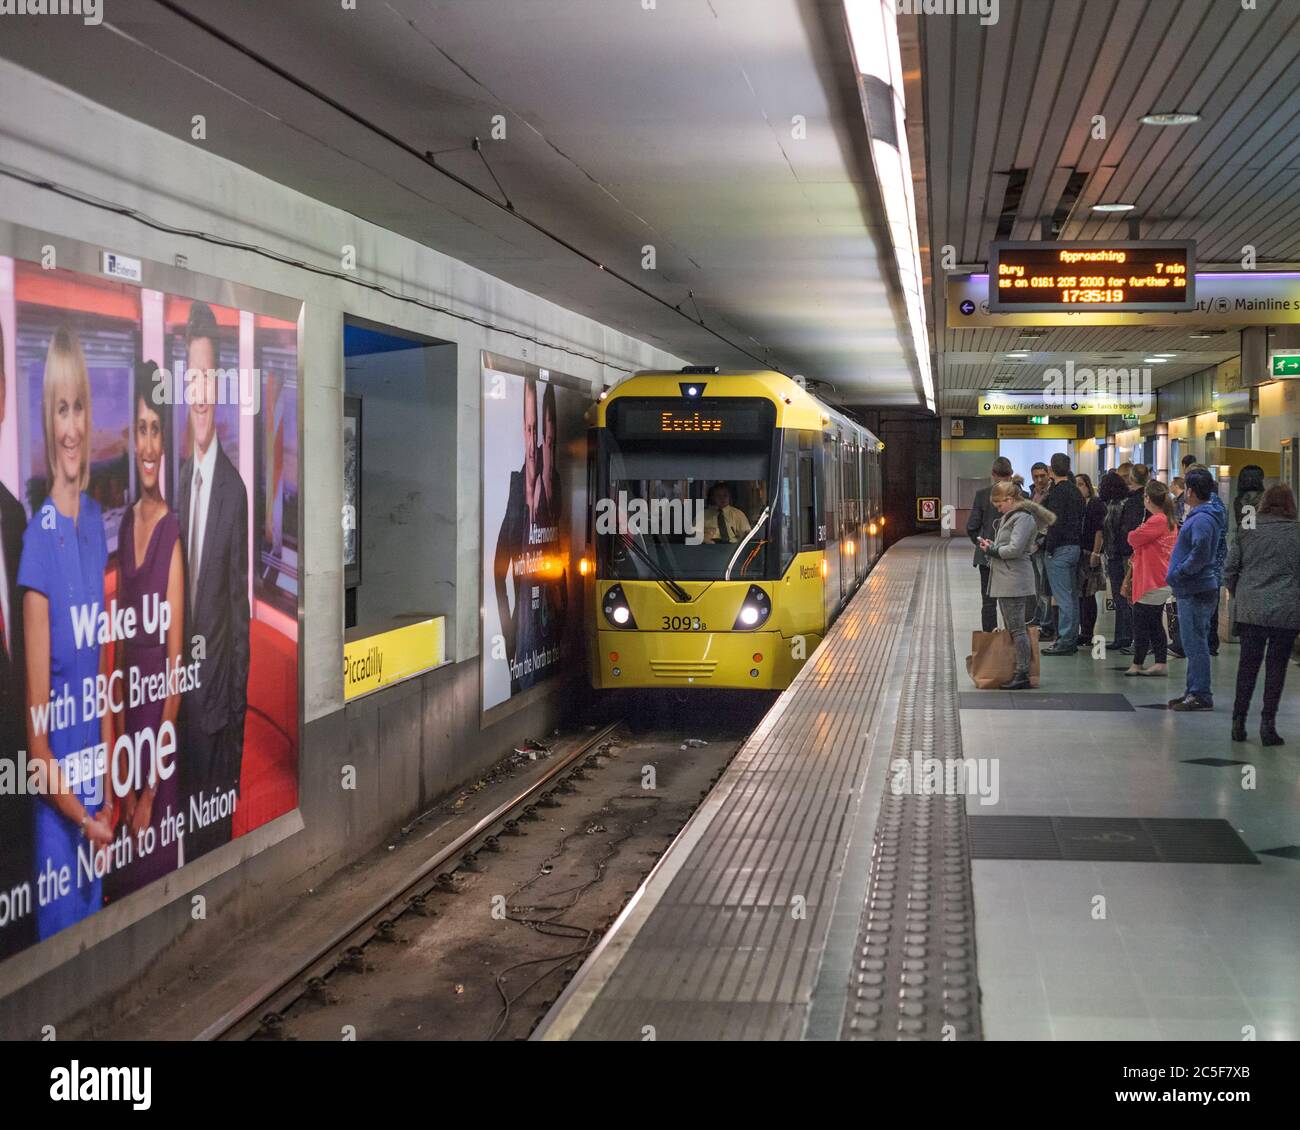 Manchester Metrolink Bombardier Flexity M5000 tram 3093 in the underground tram station at Manchester Piccadilly railway station Stock Photo